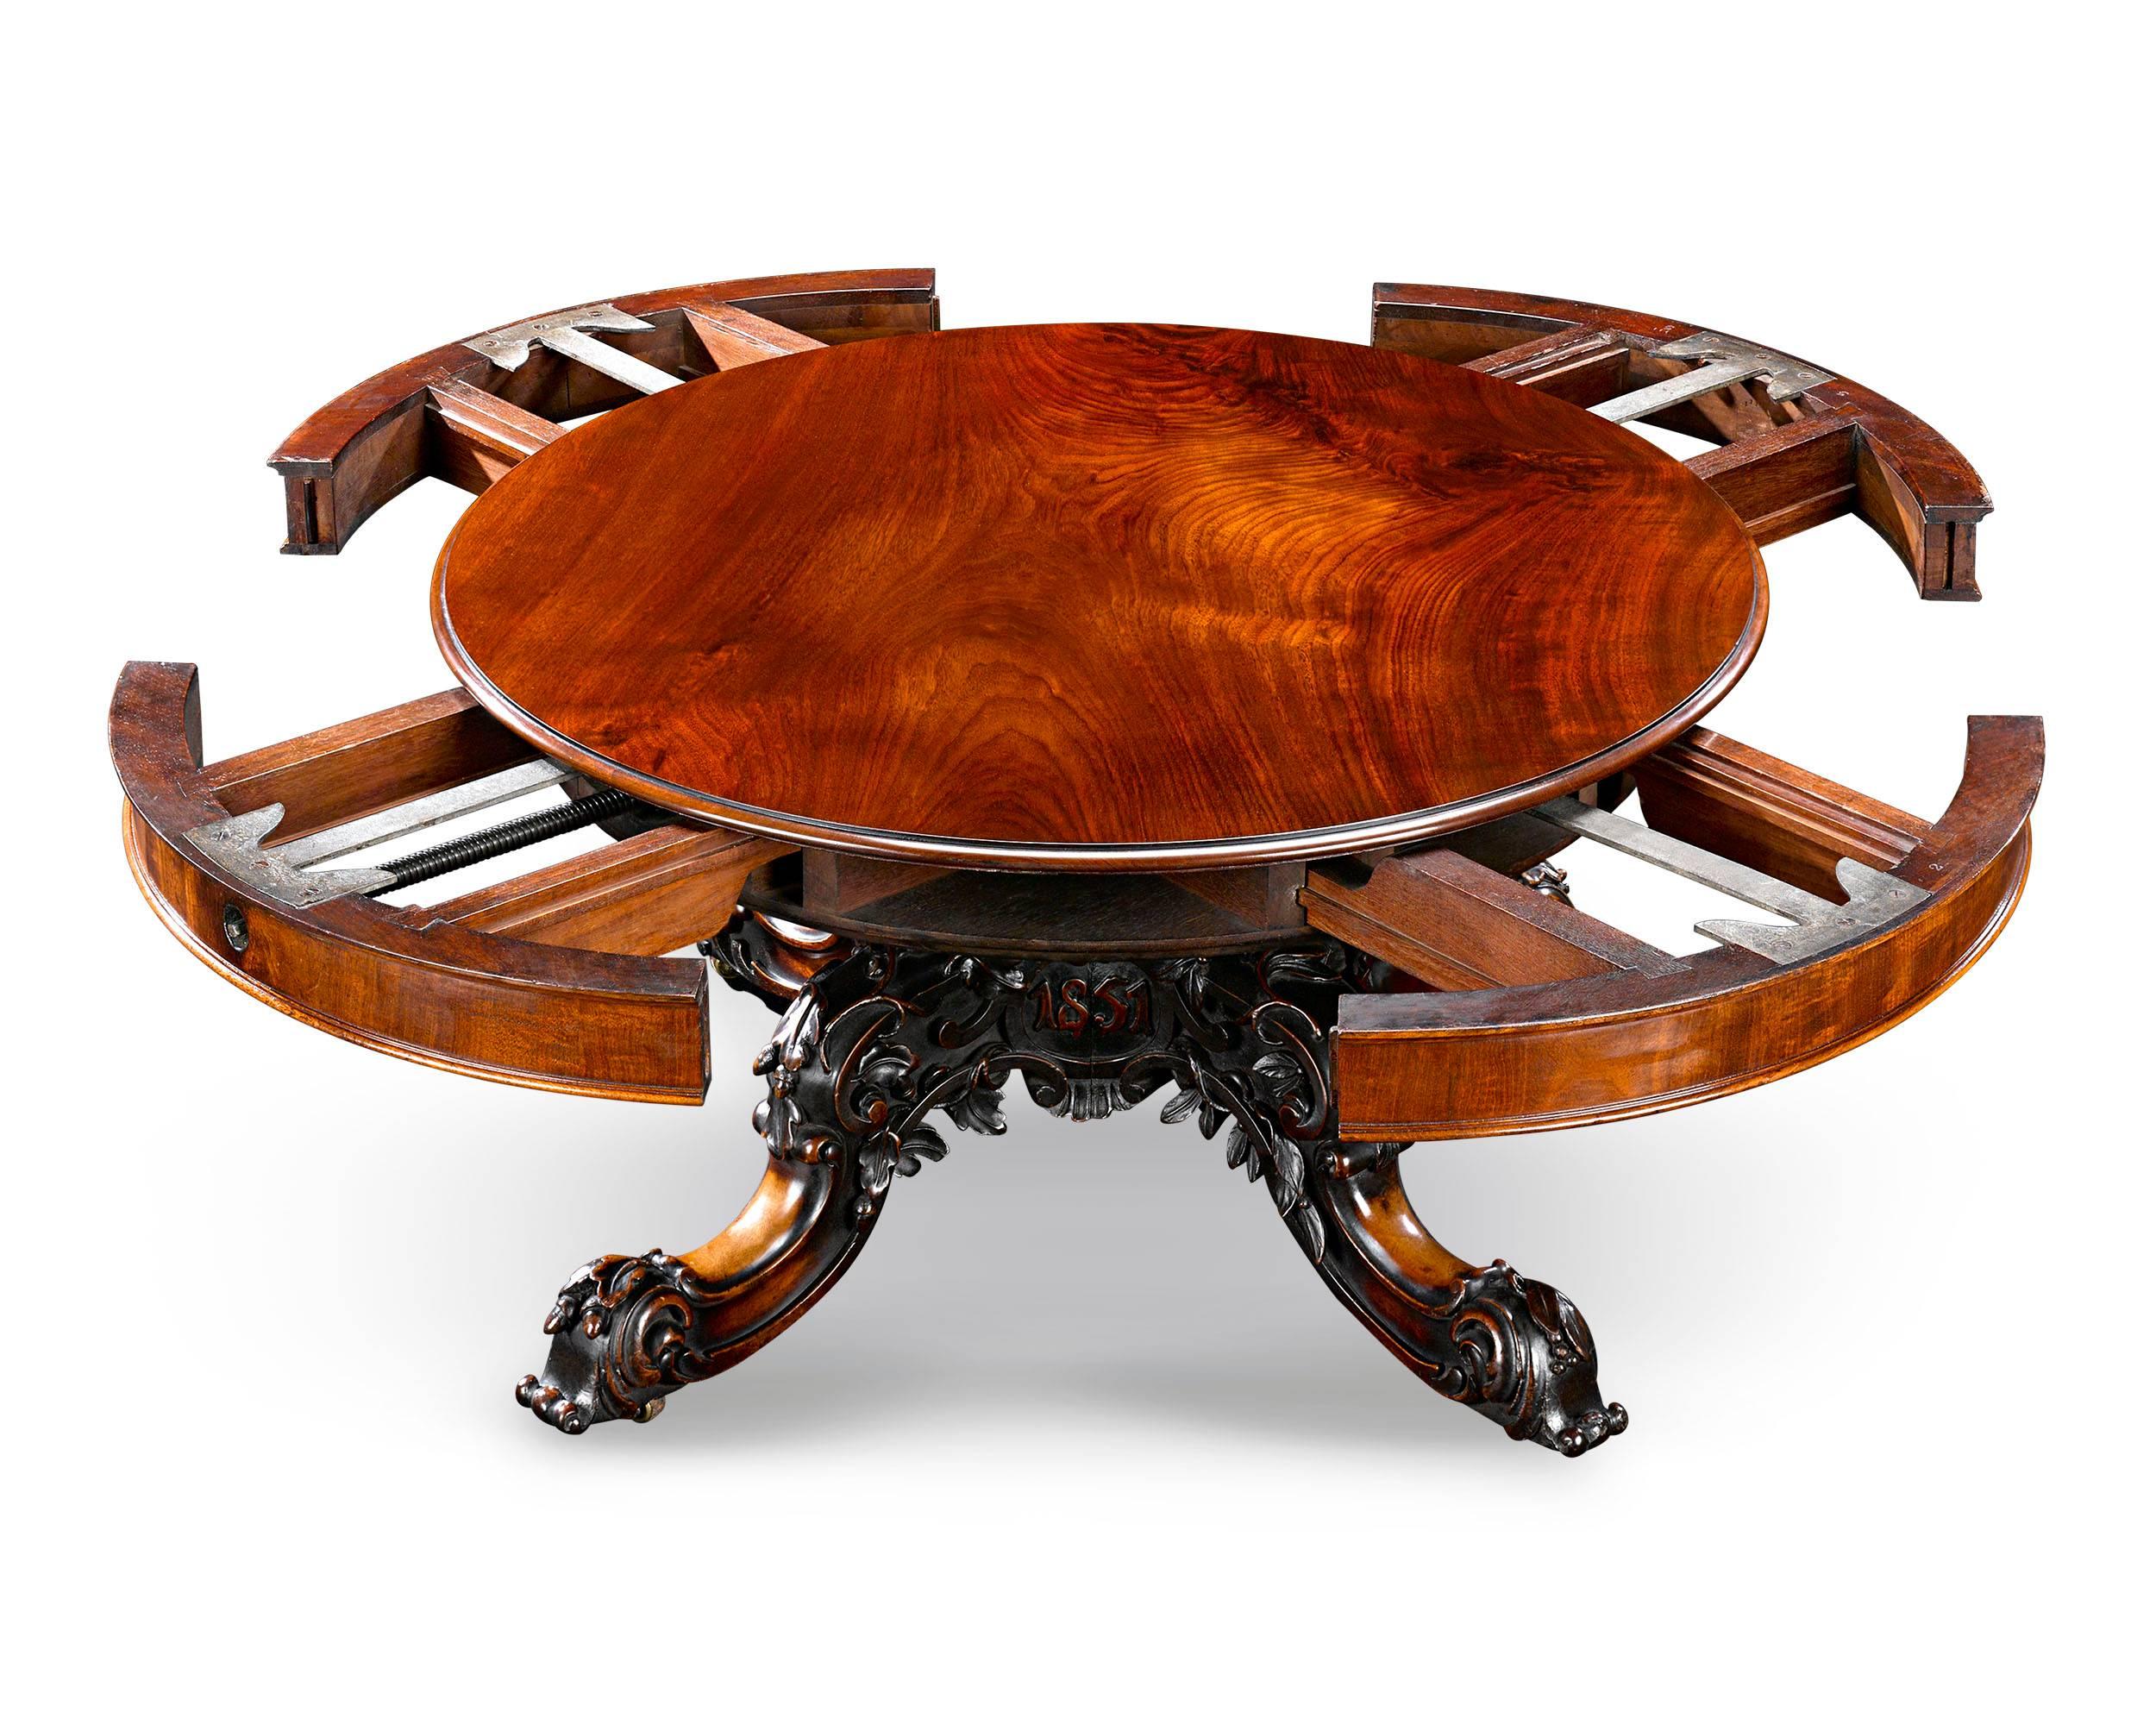 A masterpiece of both cabinetmaking and mechanical engineering, this one-of-a-kind expanding table was crafted by the renowned cabinetmaker Samuel Hawkins of London for the Great Exhibition of 1851. Diminutive in size, the fascinating table was